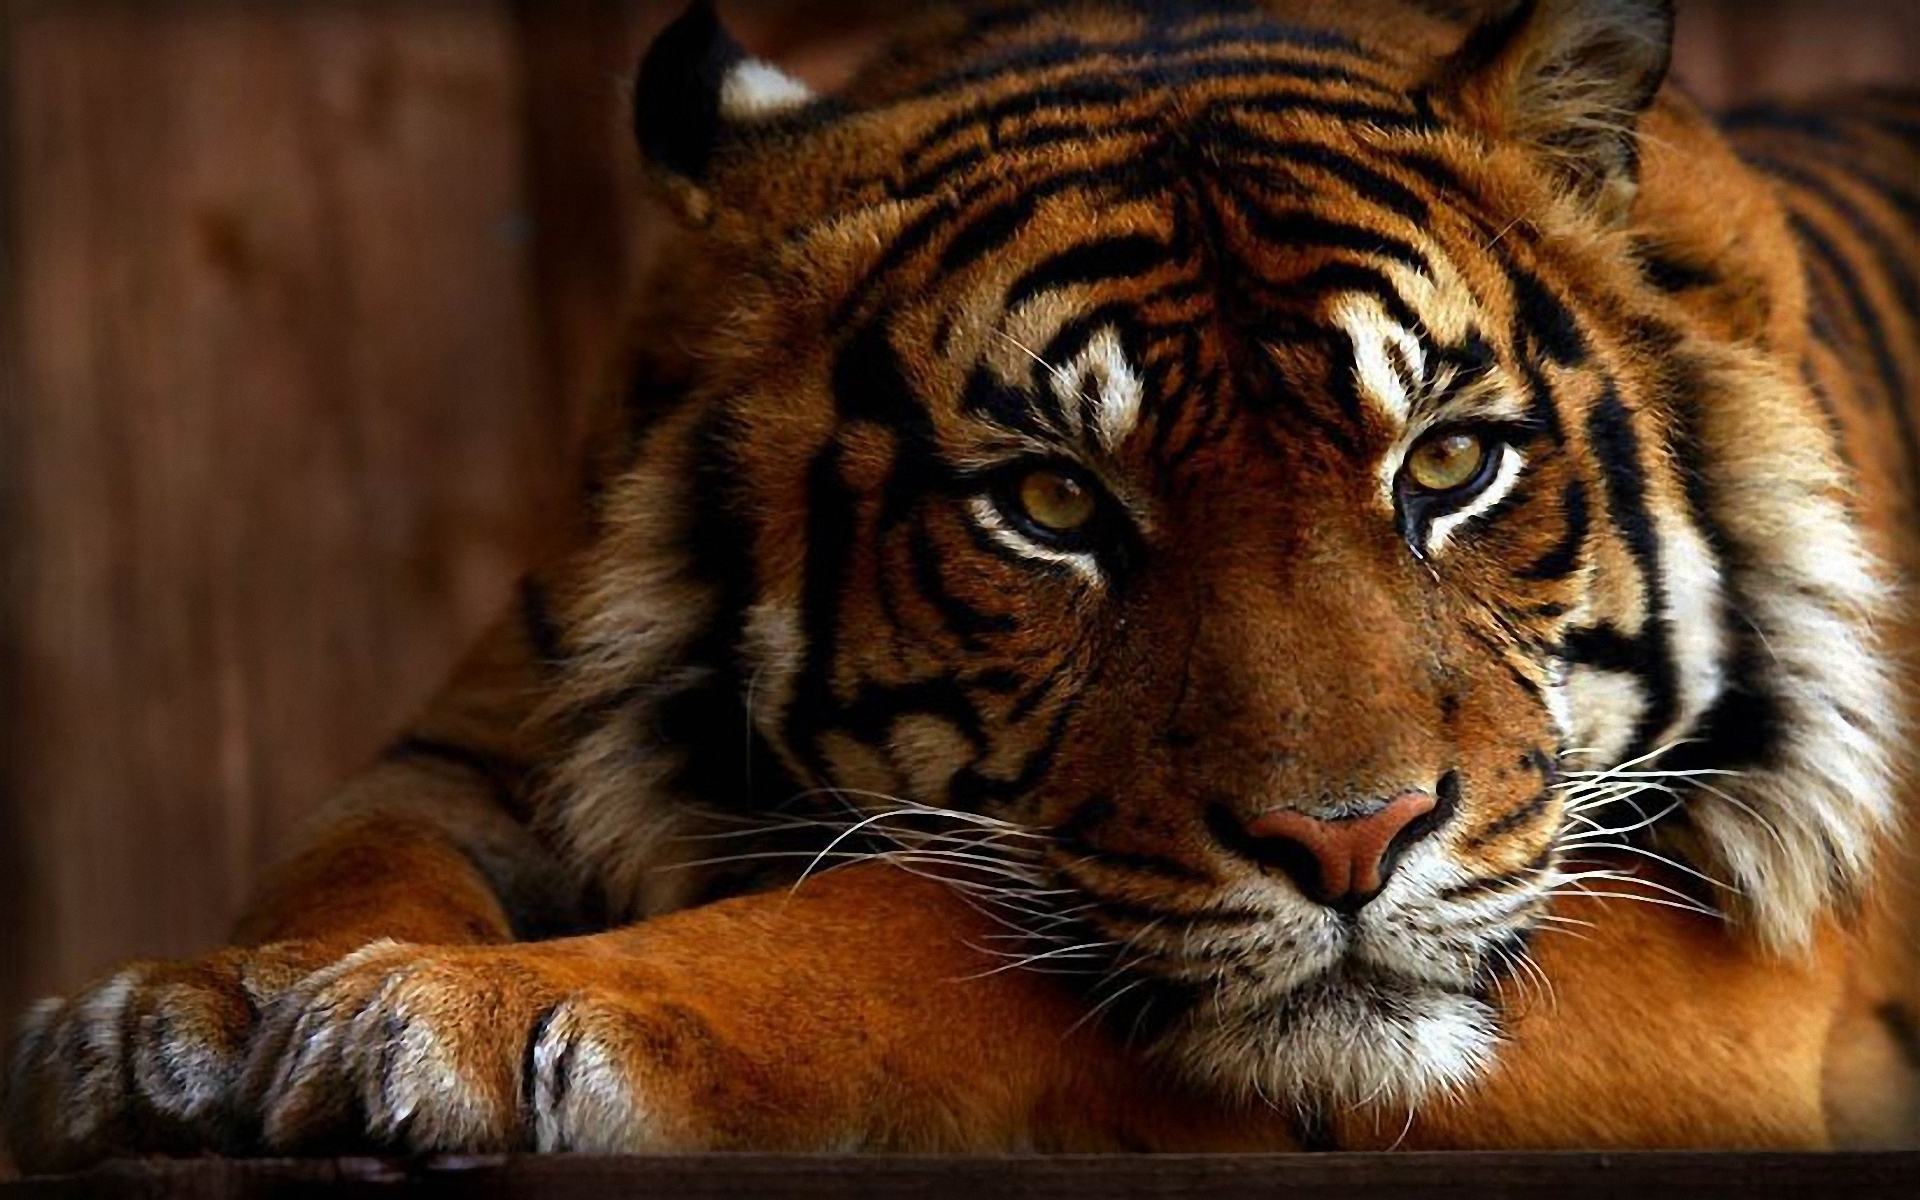 Tiger wallpapers and images wallpapers pictures photos